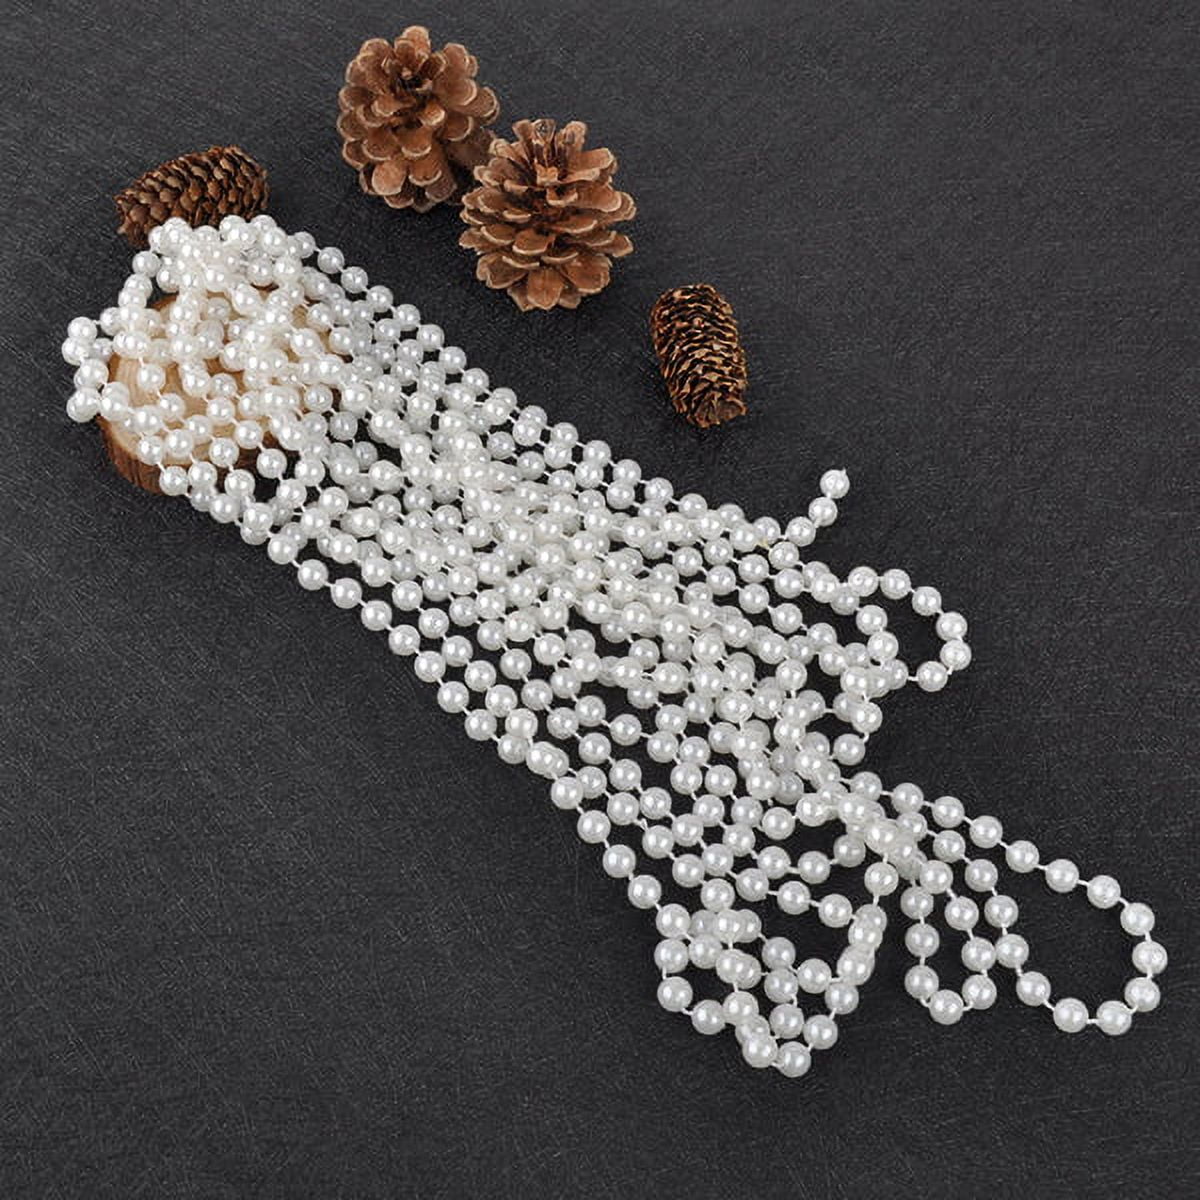 3mm/4mm/5mm Fused Pearl Beads String Faux White, Ivory, Clear Iridescent  ABWhite